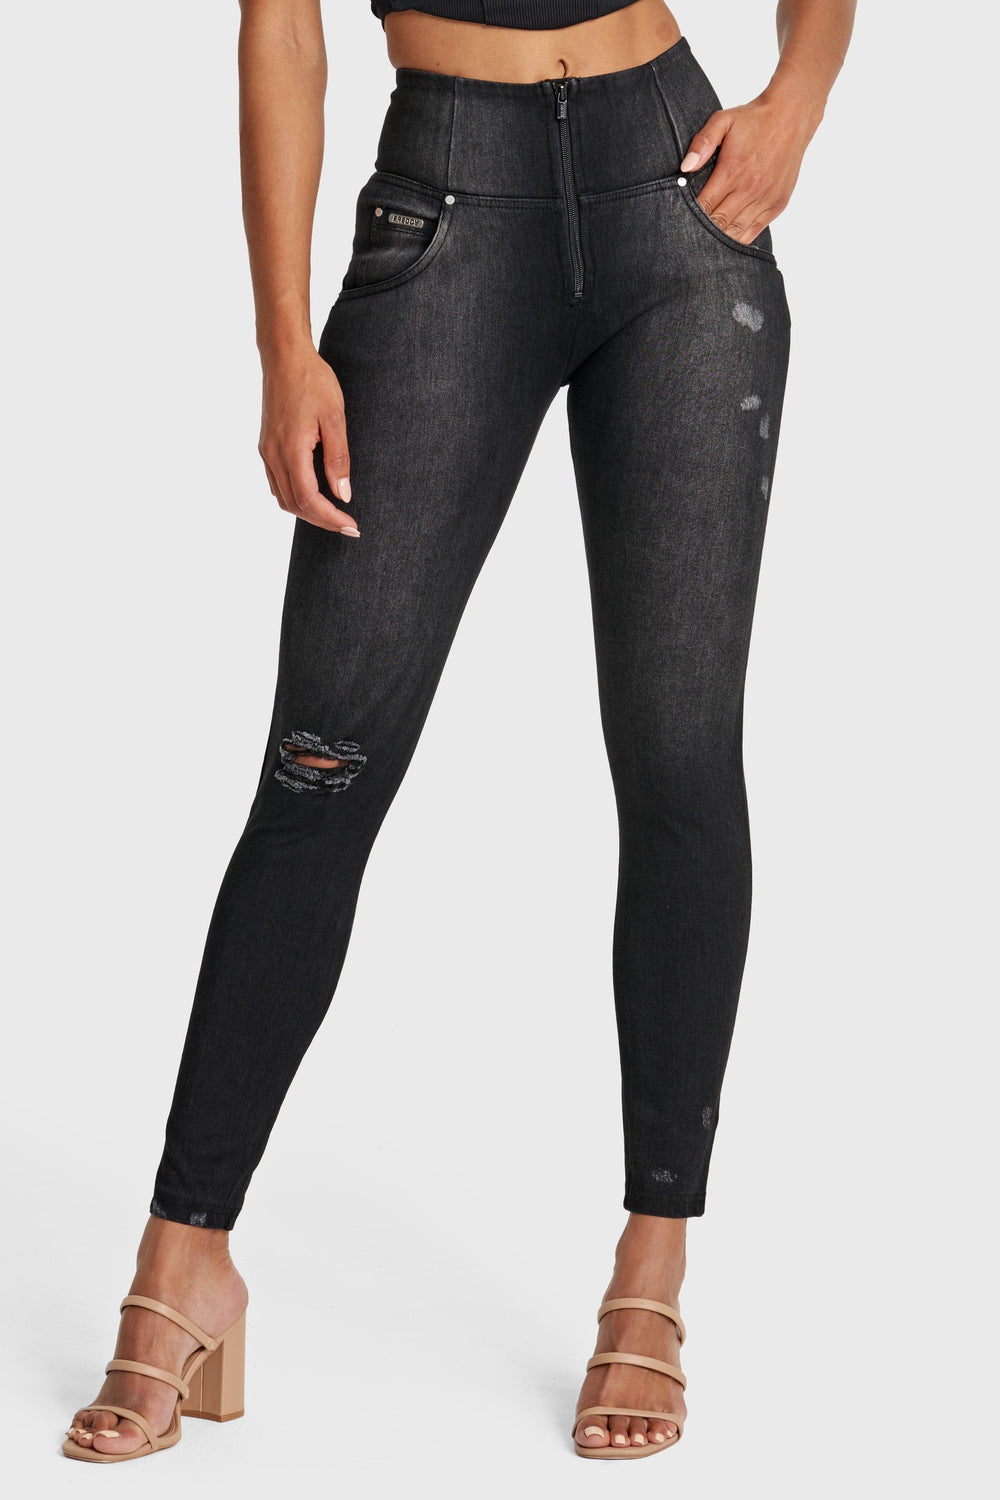 Butt Shaping & Lifting Distressed Jeans in Black | Freddy